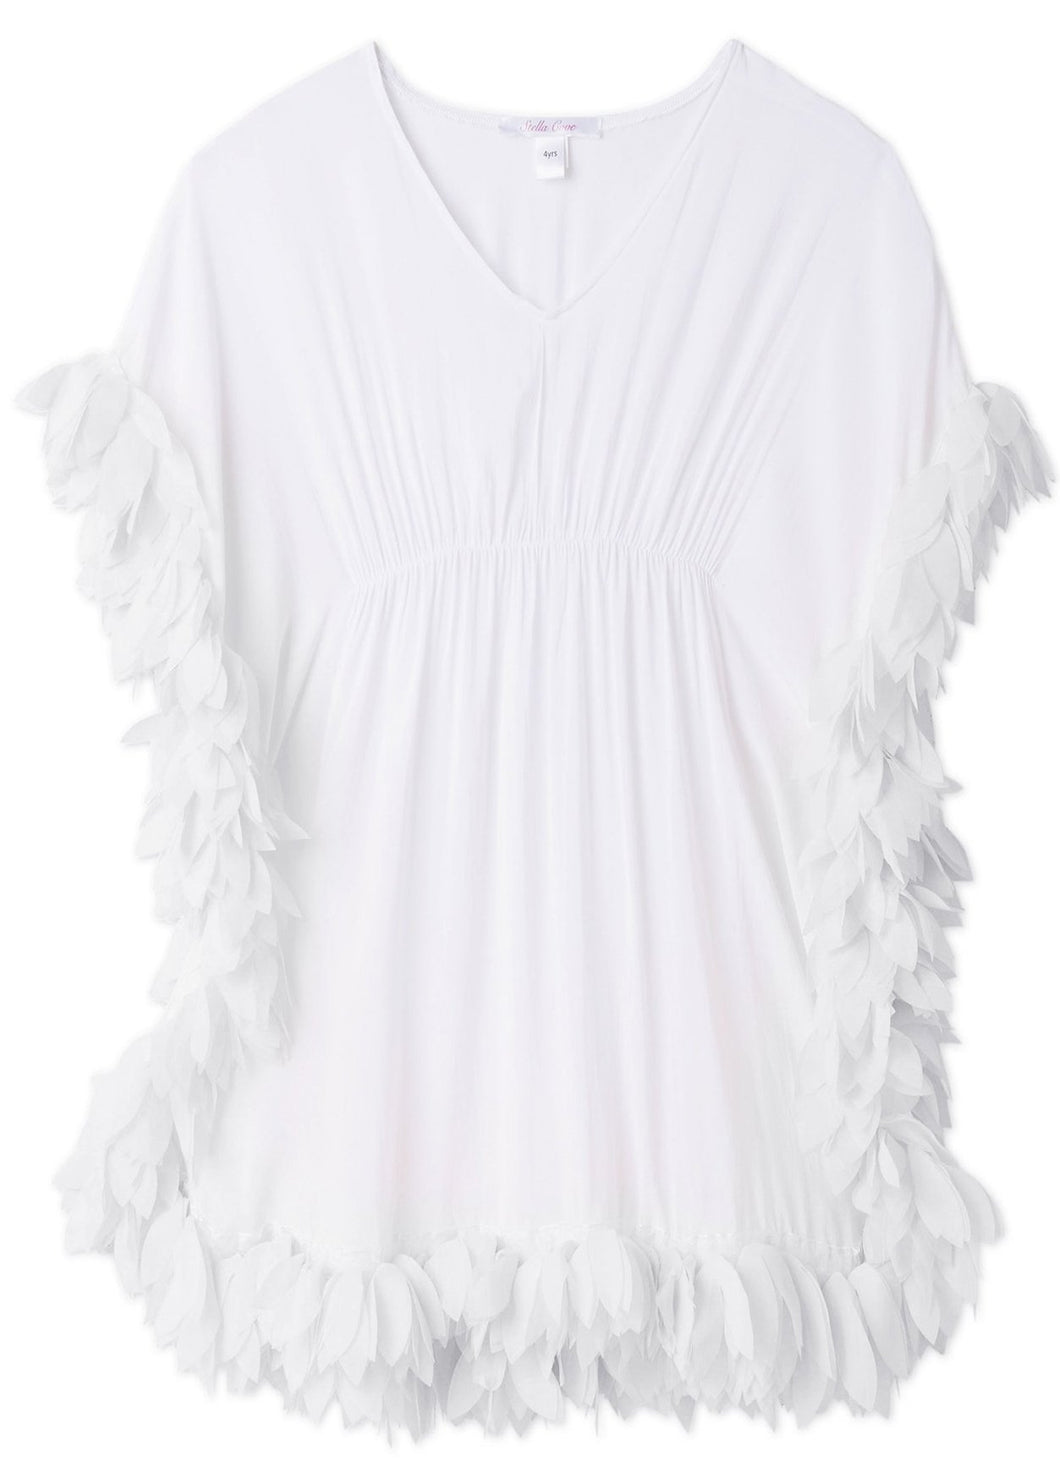 White Cover-up Poncho with White Petals